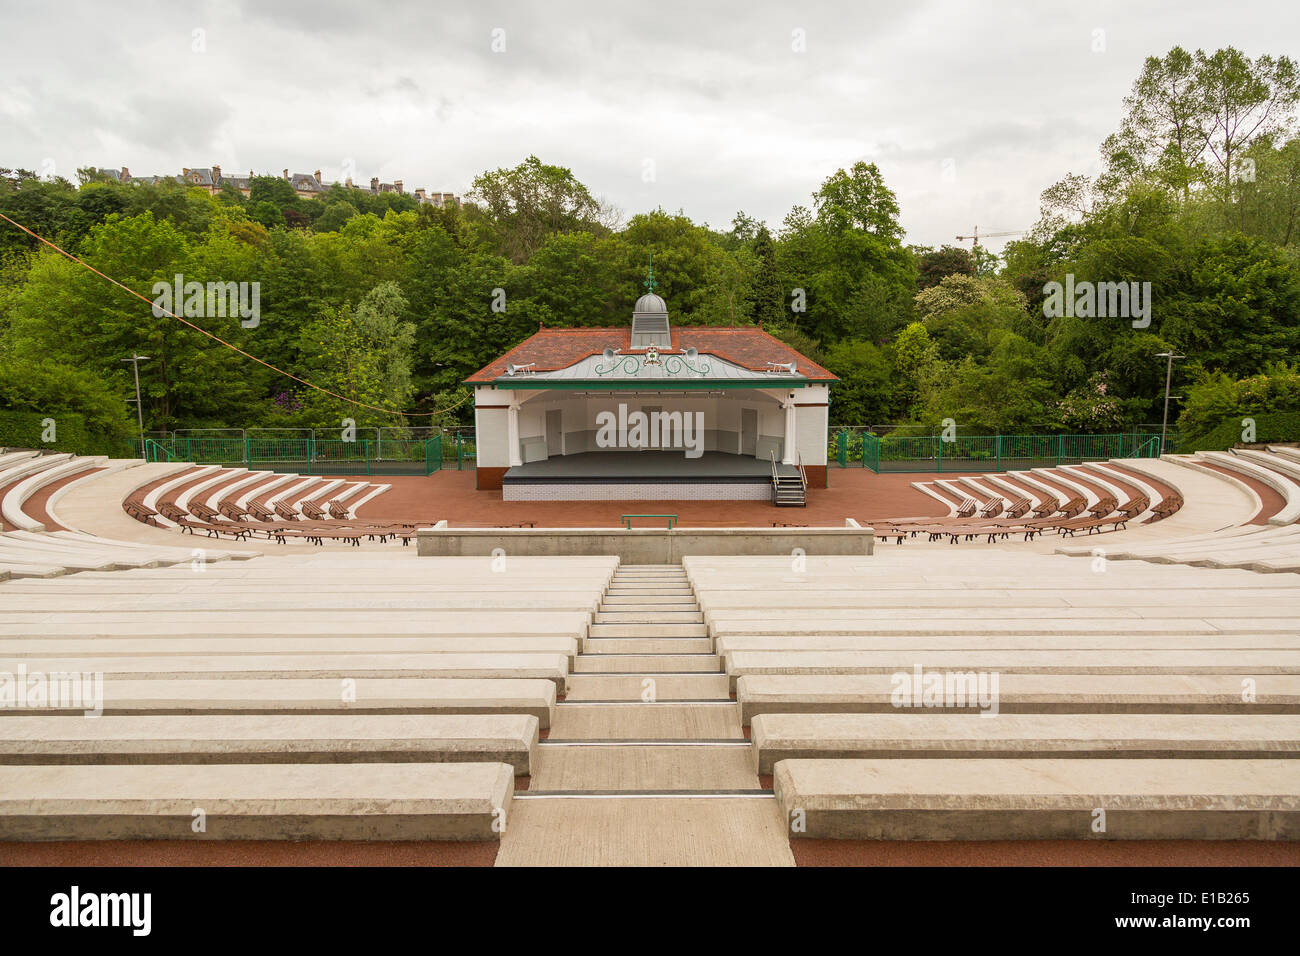 Kelvingrove Park, Glasgow, Scotland, UK. 29th May 2014. Kelvingrove Bandstand & Amphitheatre, closed in 1999 after falling into a state of disrepeair reopens to the public after a £2m restoration project. Paul Stewart/Alamy News Stock Photo